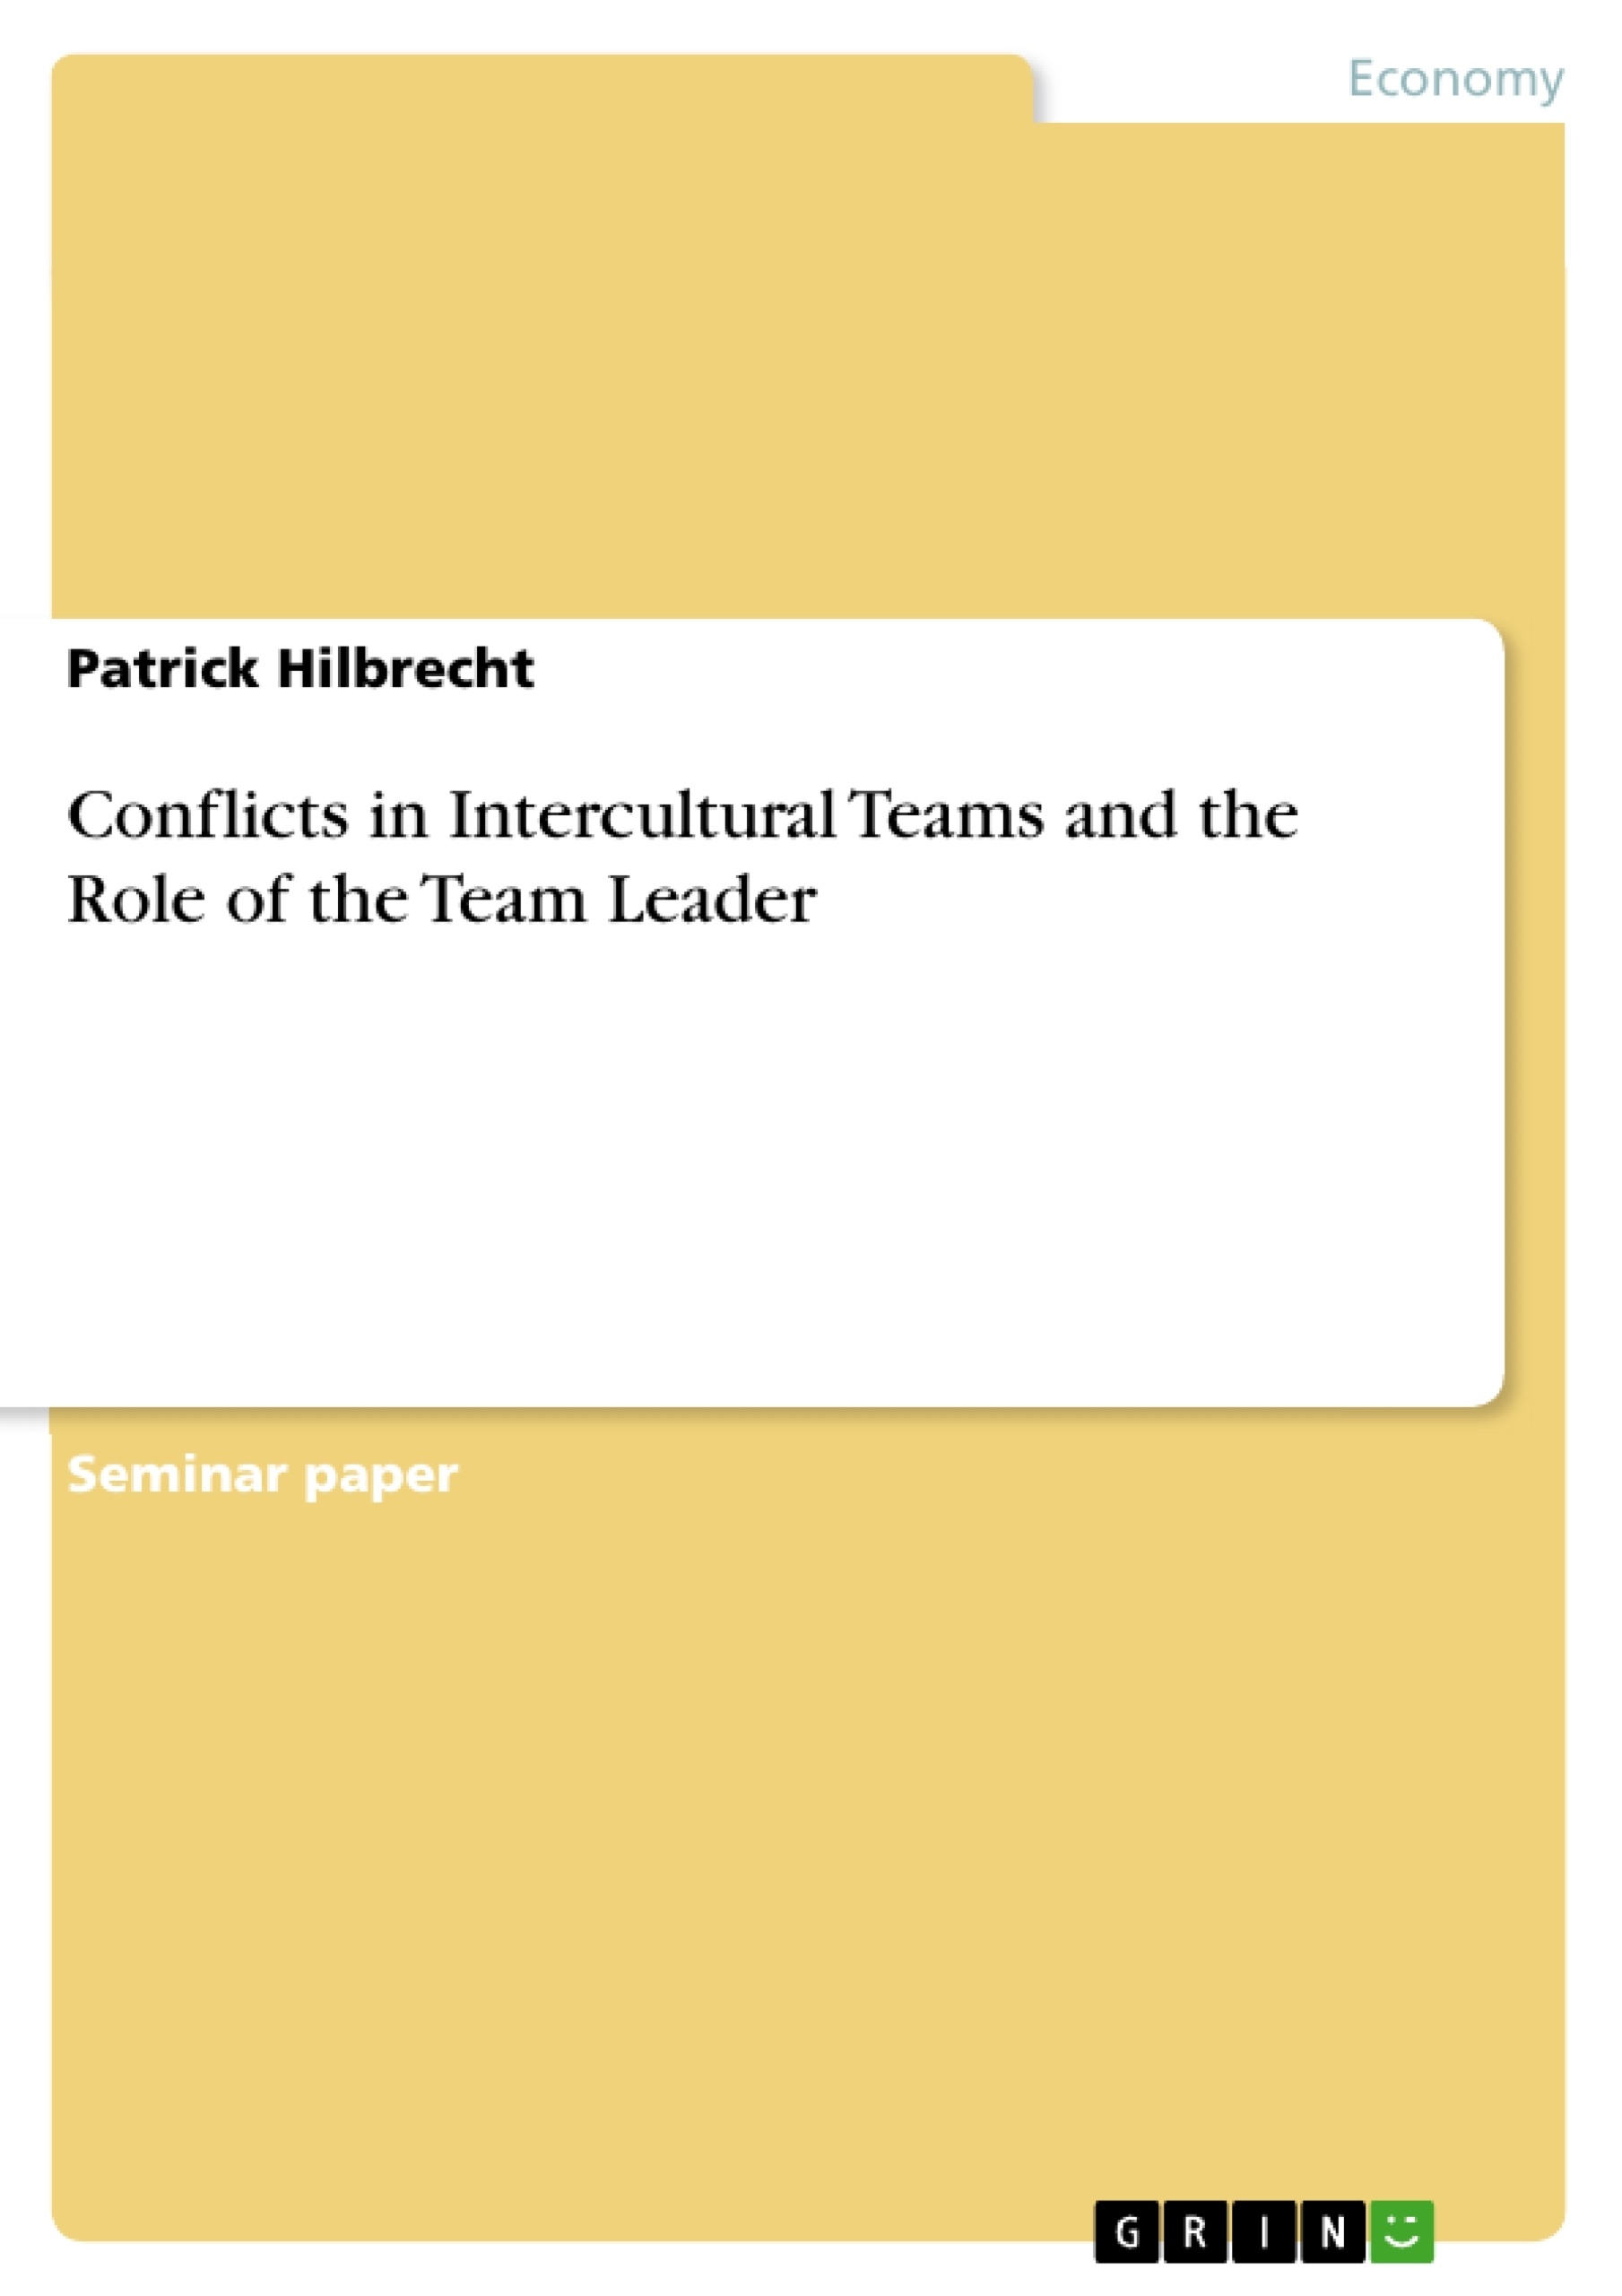 Title: Conflicts in Intercultural Teams and the Role of the Team Leader